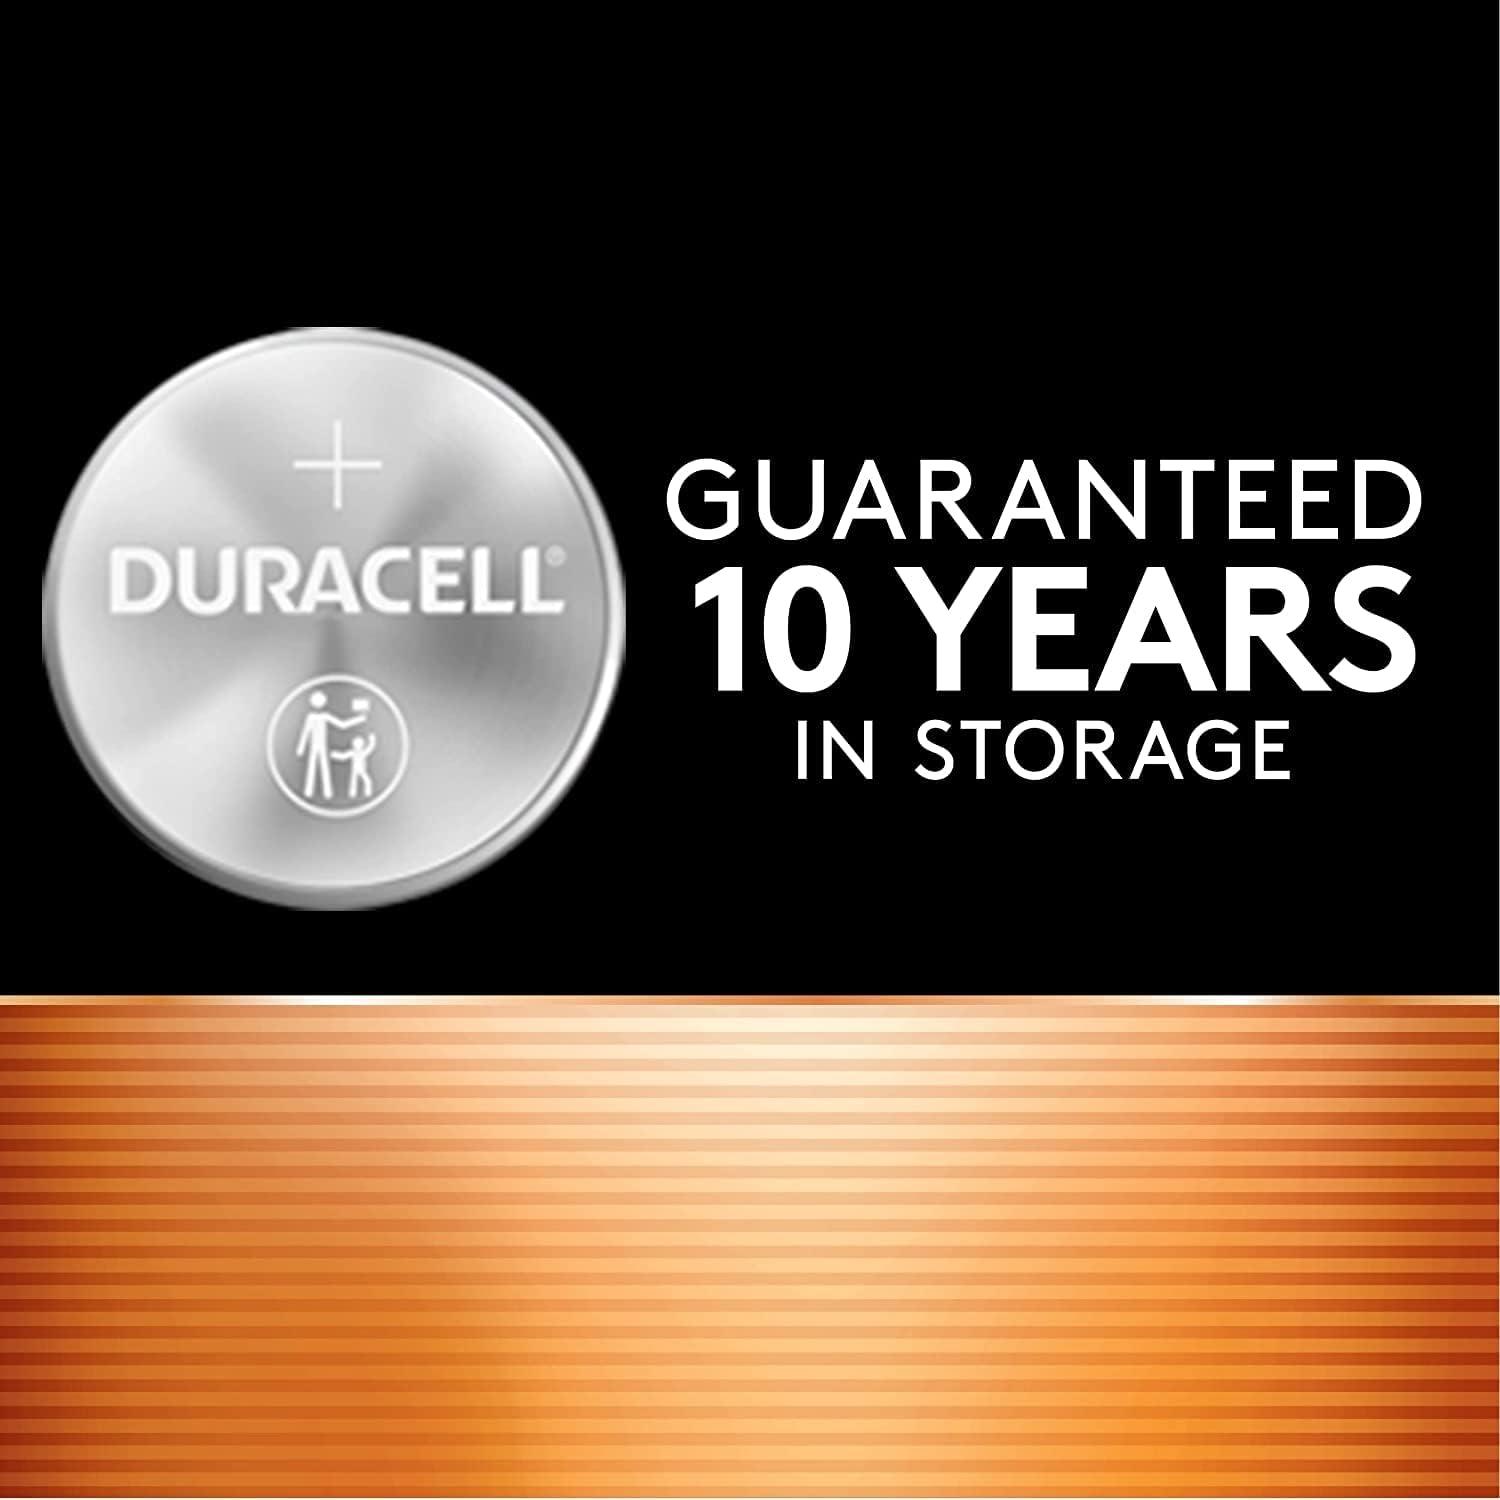 Duracell Lithium CR2032 Coin Batteries (4-Pack) in the Coin